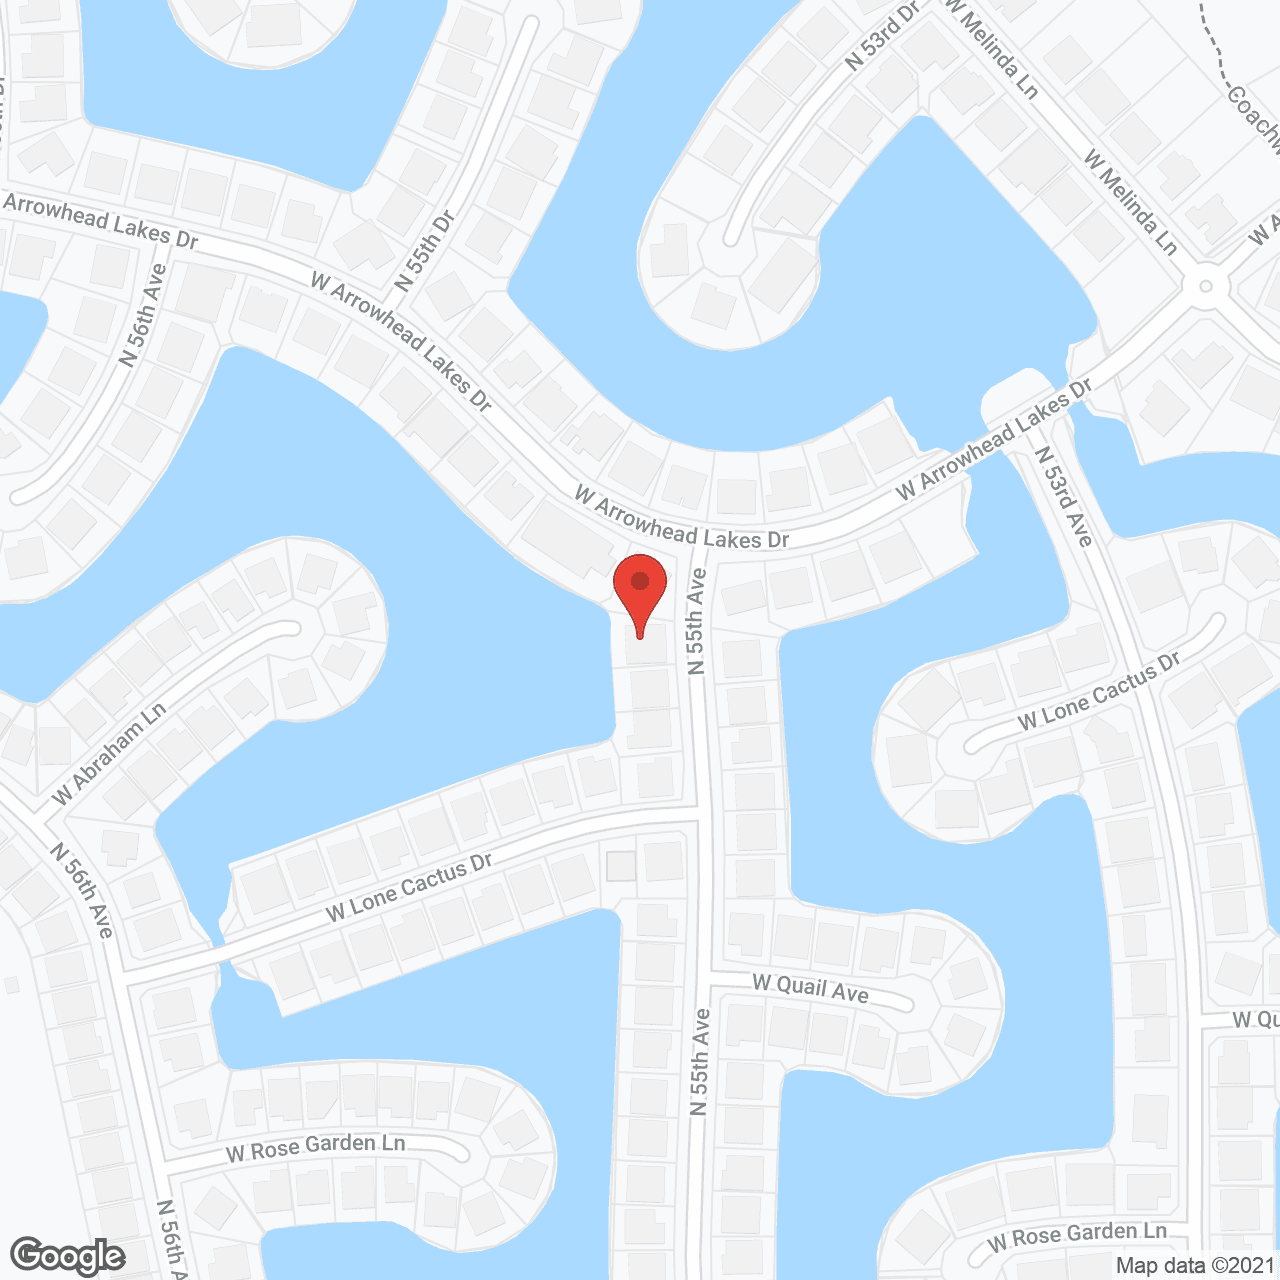 Arrowhead Lakes Adult Home Care in google map